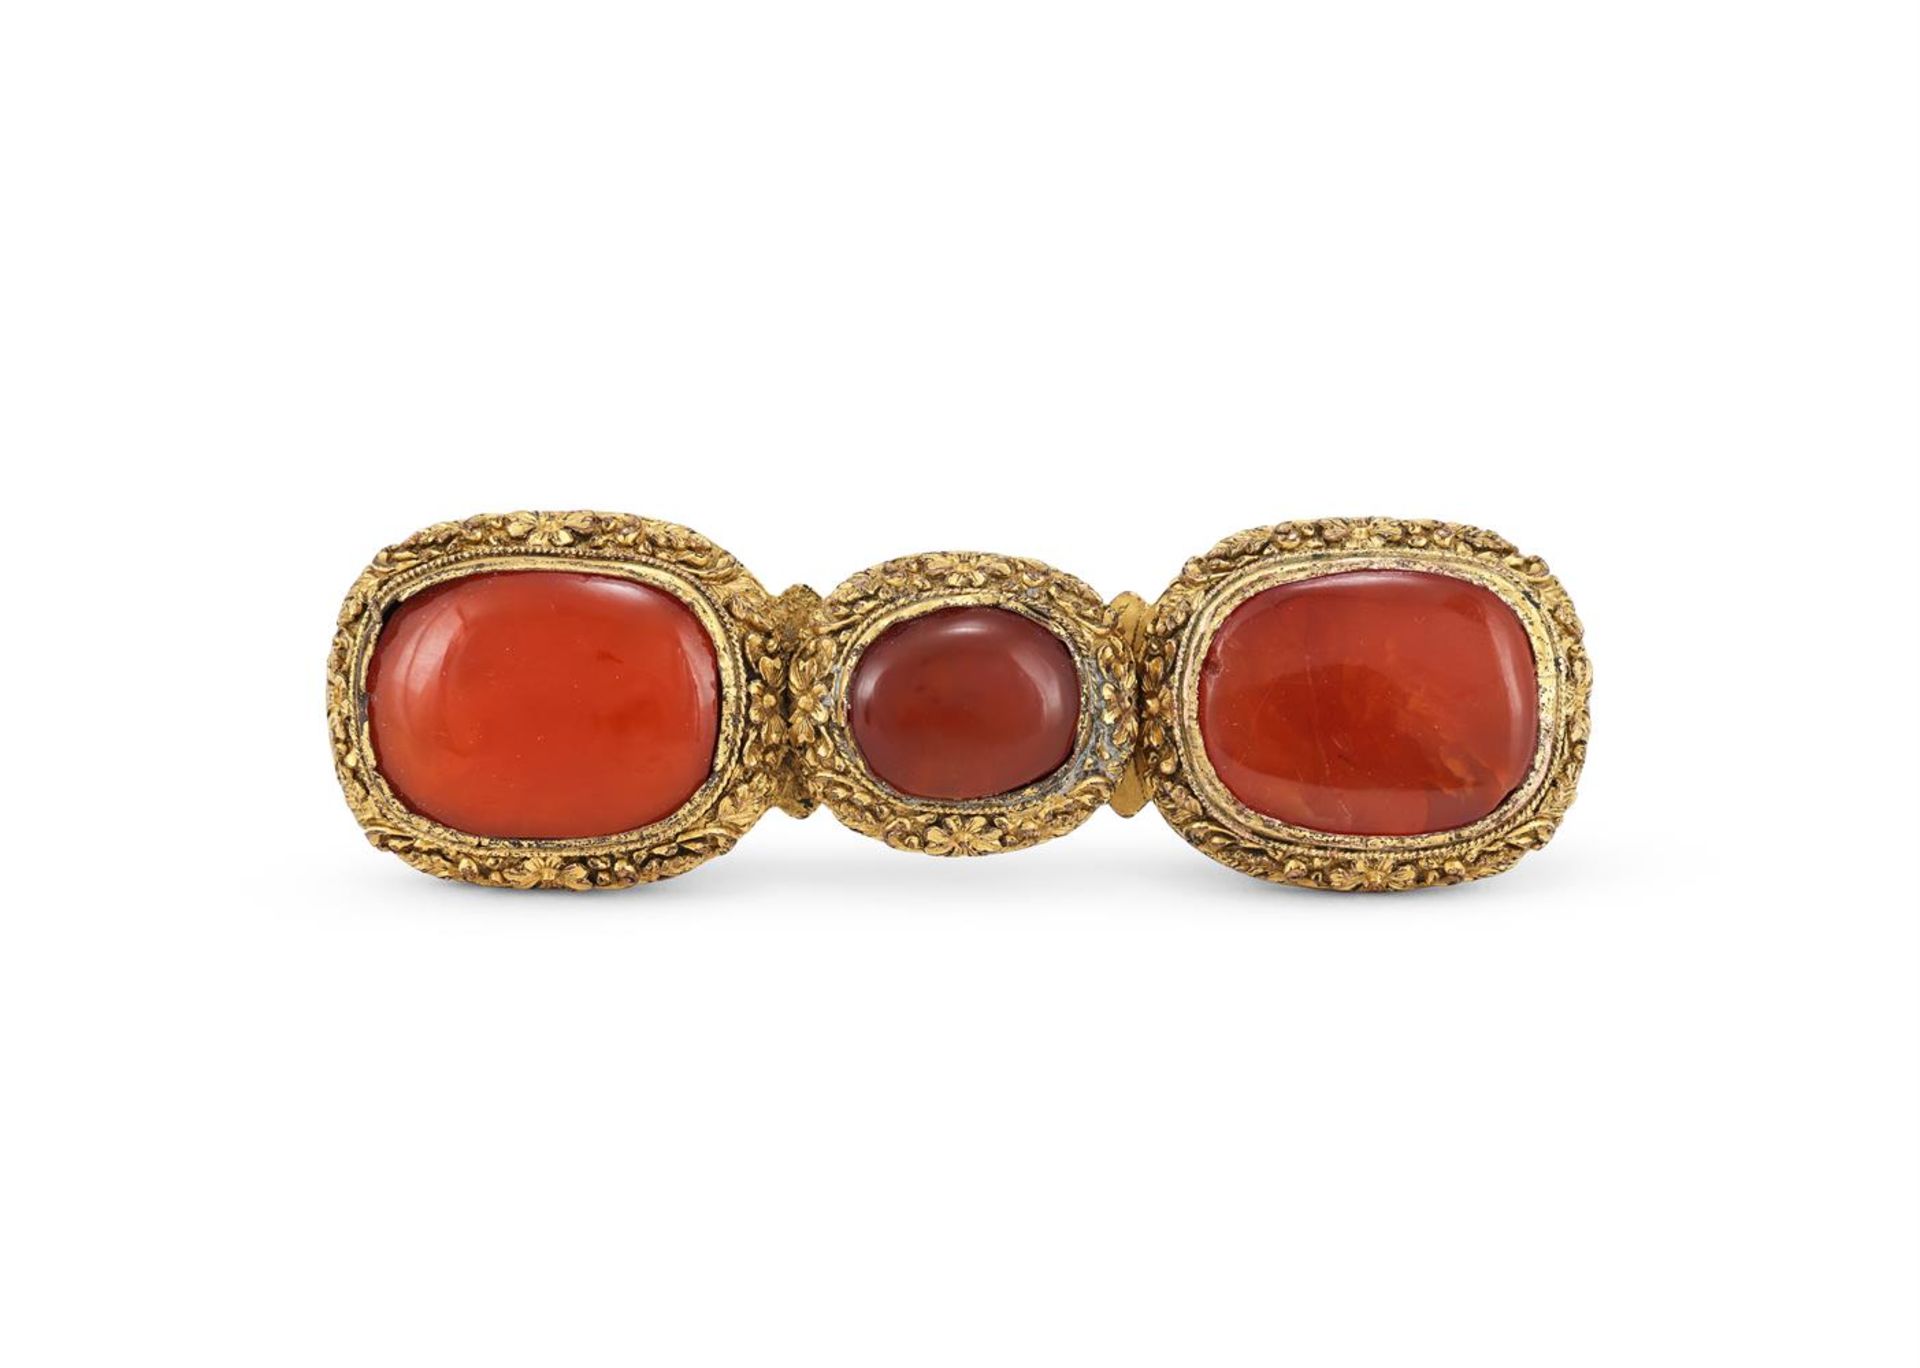 A Chinese gilt-bronze mounted carnelian agate buckle